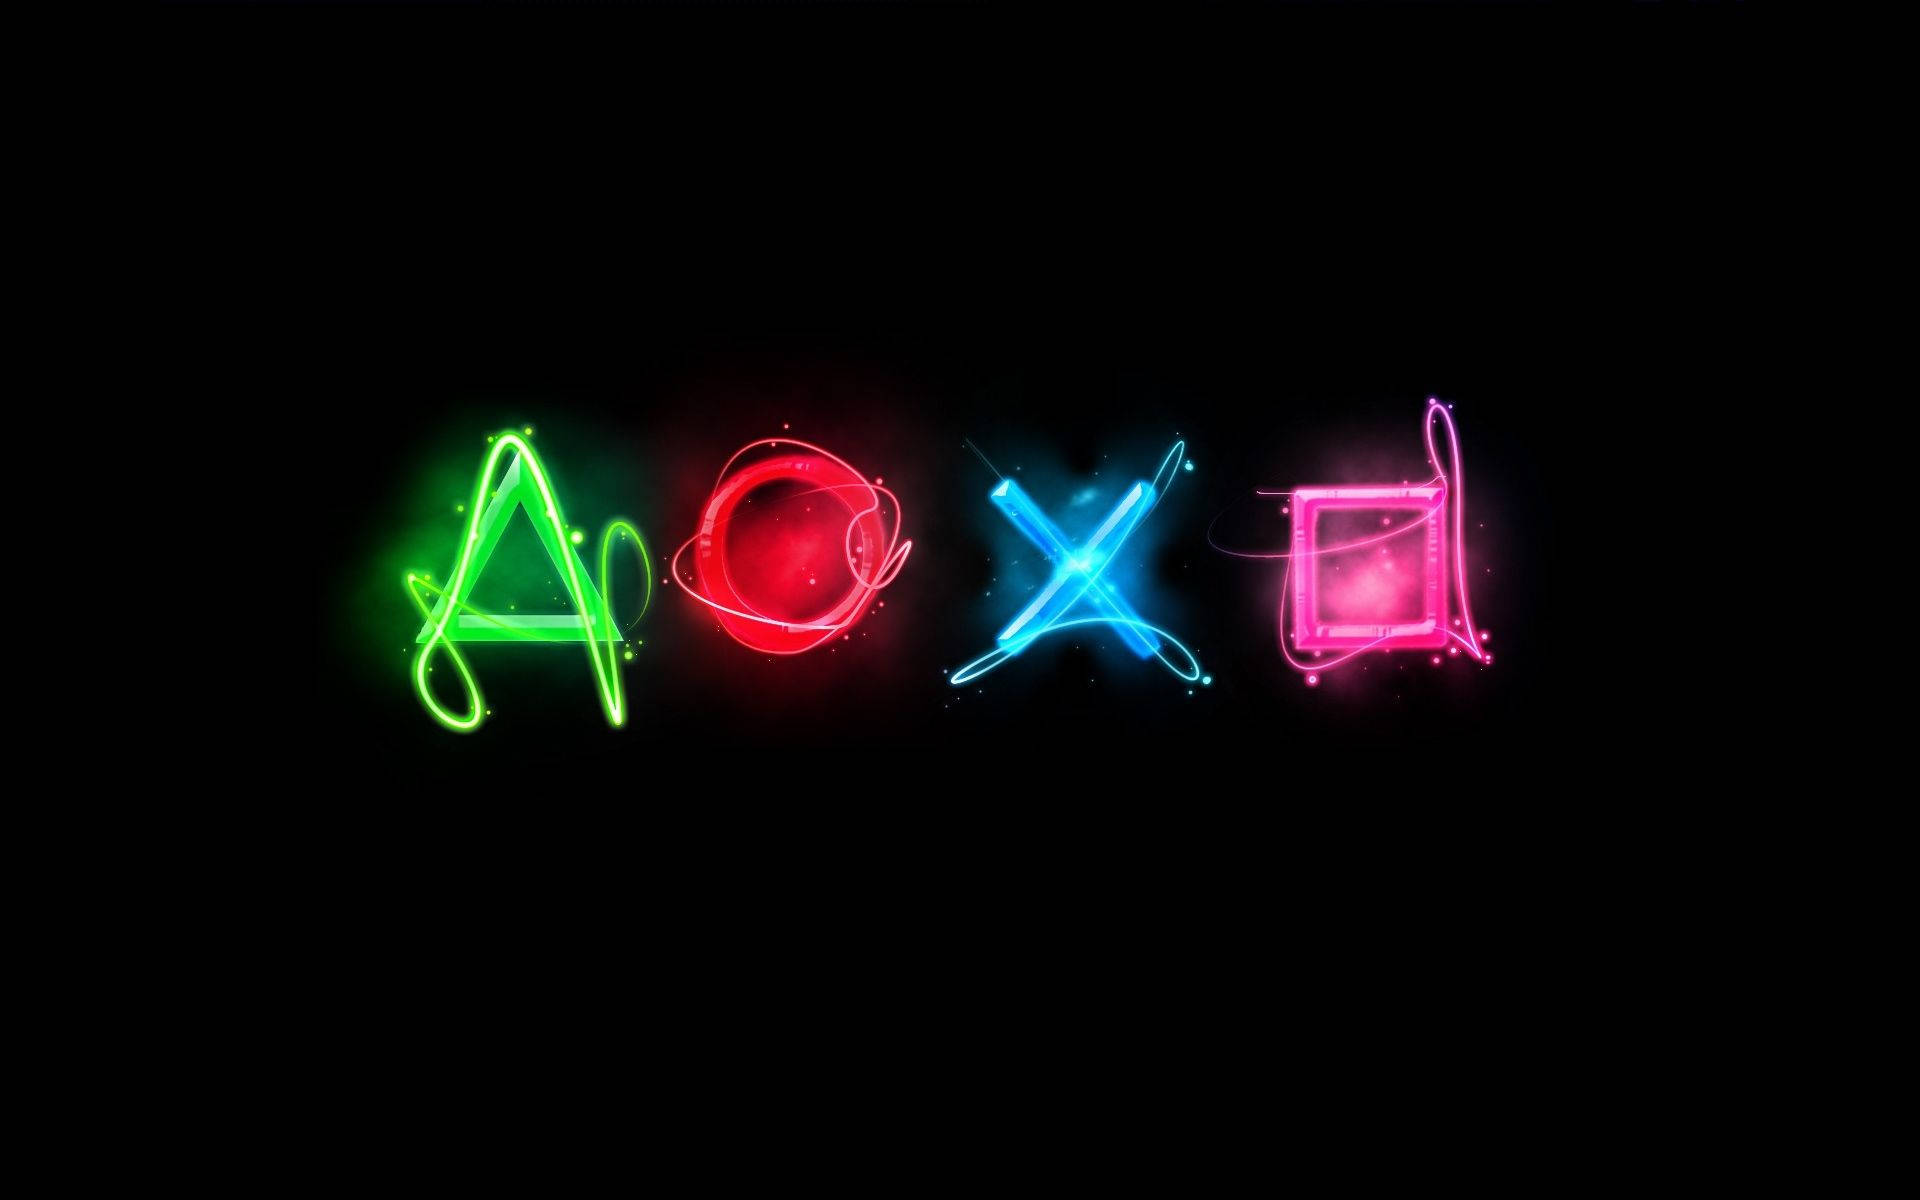 Light up your gaming experience with the neon action buttons of the PS4. Wallpaper